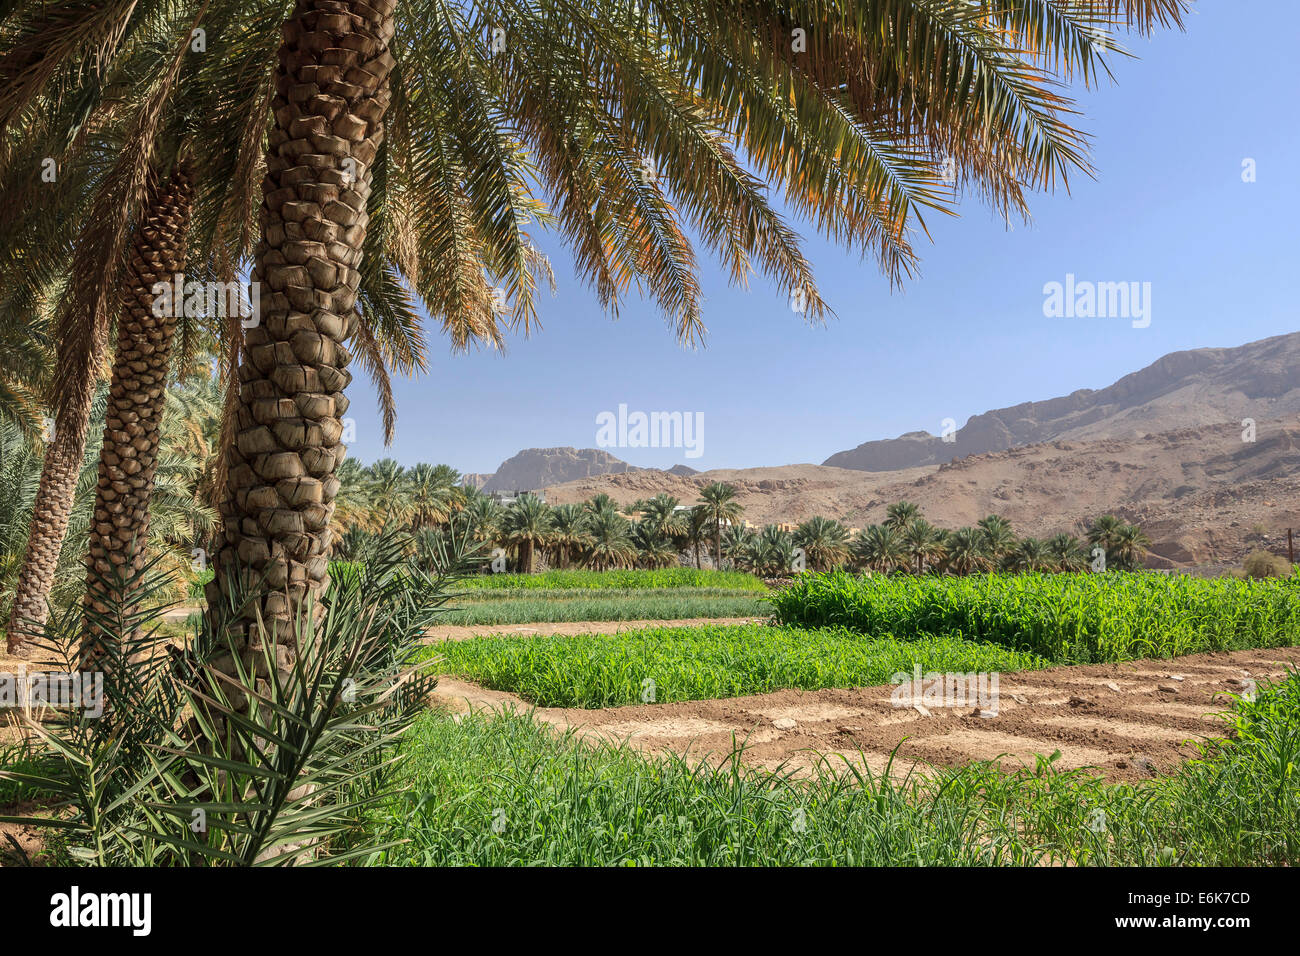 Oasis with date palms and green fields, Jebel Shams, Al Hajar Mountains, Ad Dakhiliyah Governorate, Oman Stock Photo